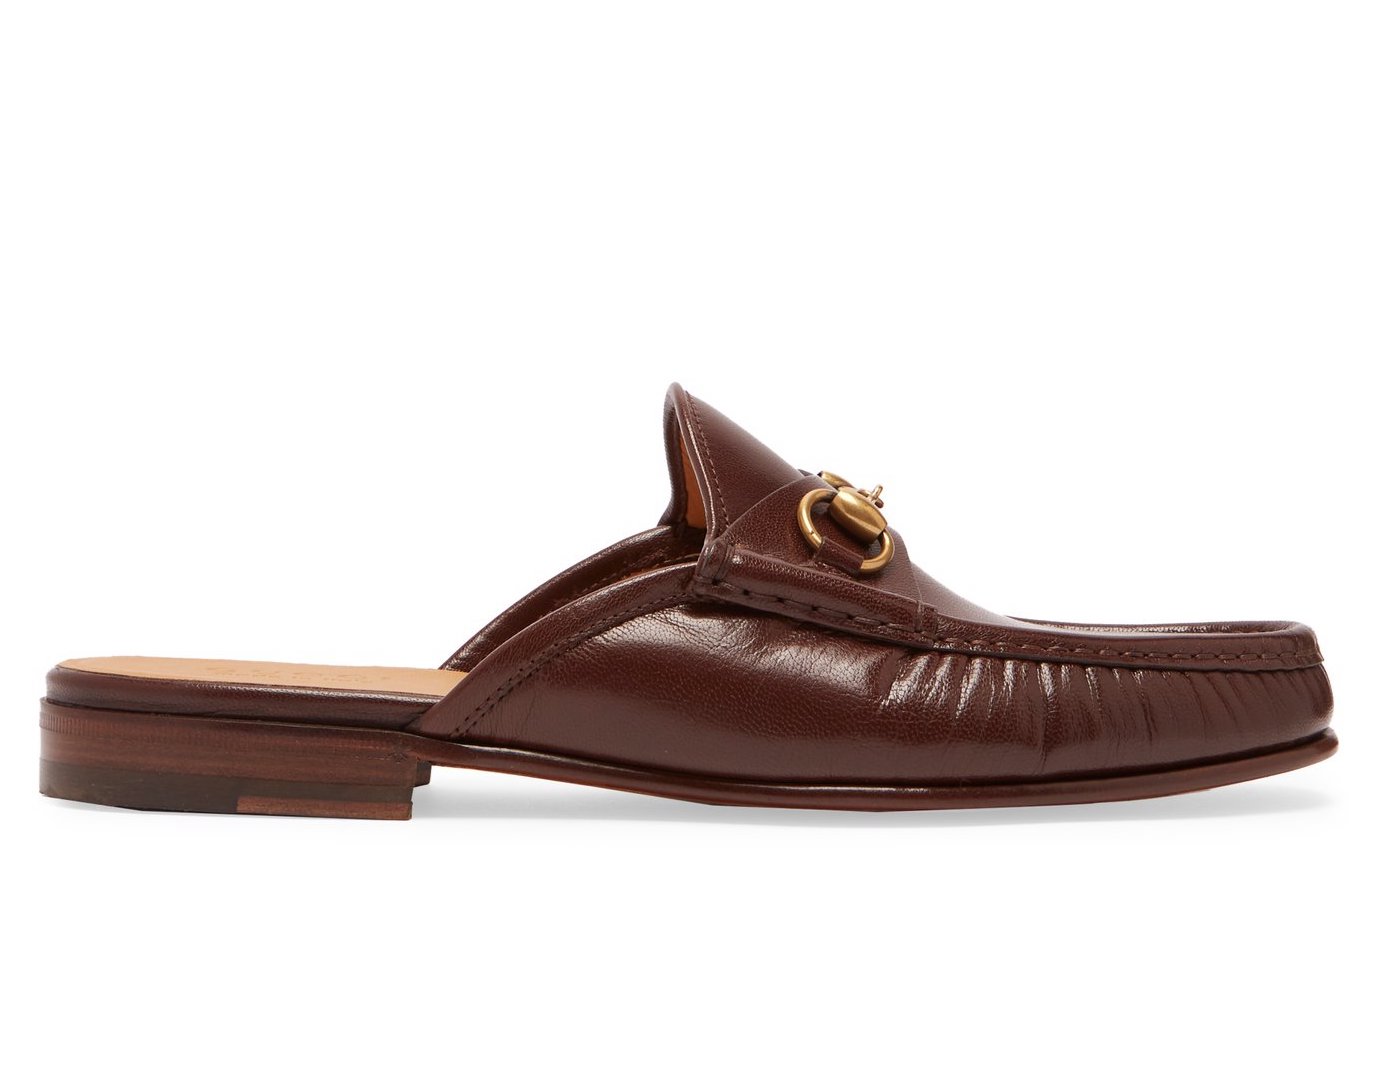 GUCCI Princetown leather backless loafers